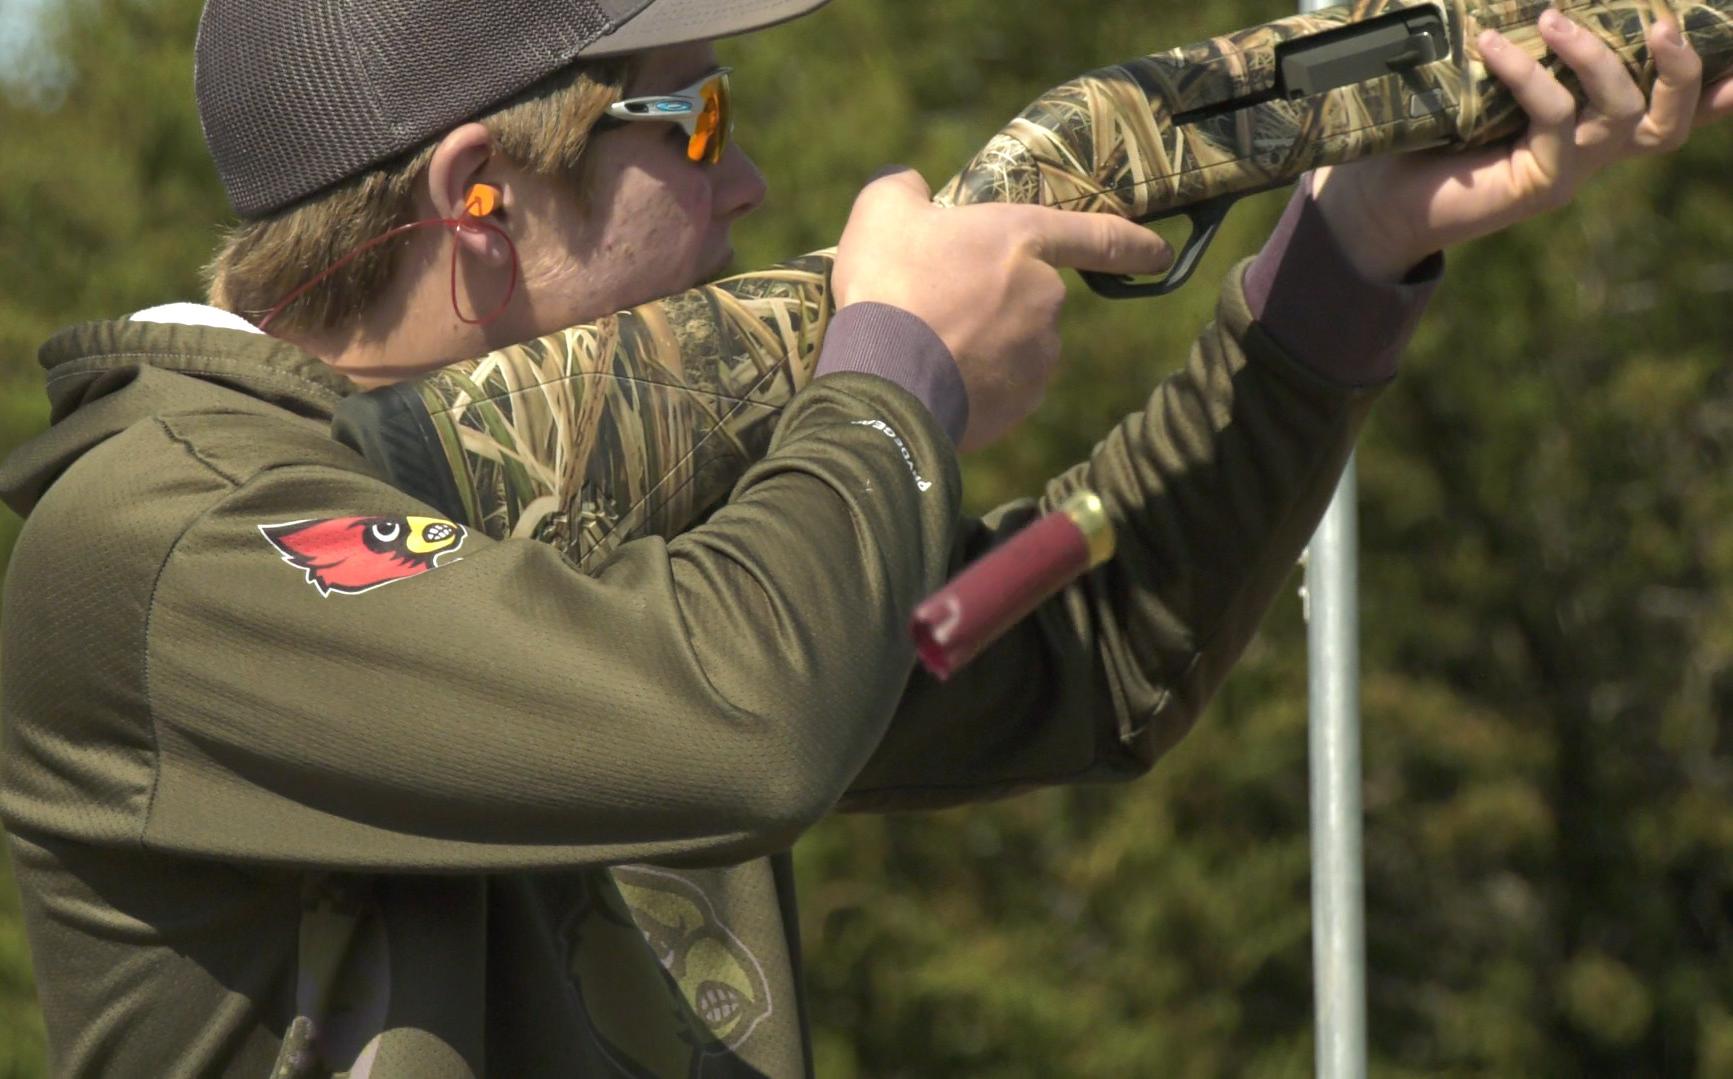 A participant in the 2021 clay shoot takes aim at flying sporting clays down range. The event also features raffle drawings, prizes for top man, woman, youth and team shooters, and a side game of flurries, which offers participants an opportunity to practice or compete amongst themselves for bragging rights.